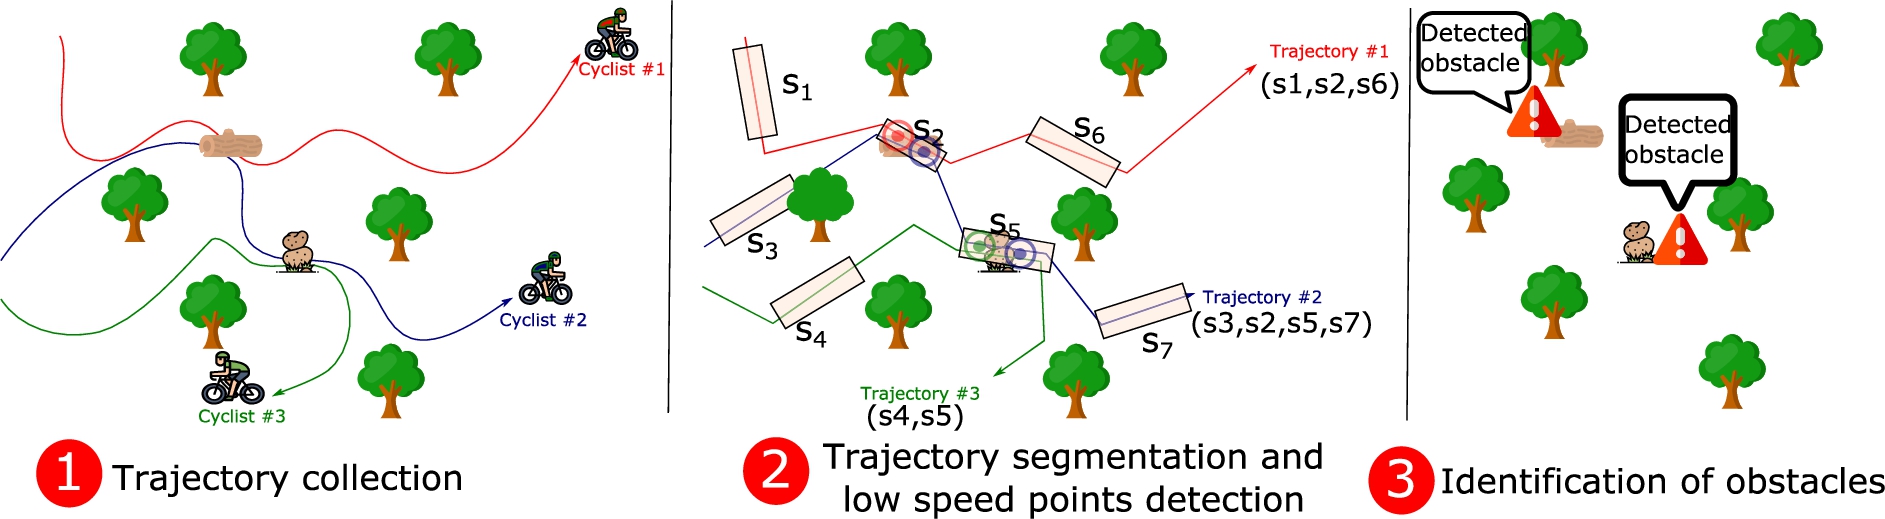 Proposed methodology of SAMARITAN. The leftmost figure depicts the collection of the spatio-temporal trajectories of three cyclists moving around the region of interest. The central figure shows the mapping of the captured trajectories a to a set of seven community-based segments (s1−s7), depicted as rectangles. The same figure shows a set of points where the system has detected an abnormal behaviour in terms of speed of trajectories #1 and #2 in segment s2 and trajectories #2 and #3 in segment s5. Finally, the rightmost figure shows the two alerts generated as system’s outcome based on the aggregation of the previous abnormal points.